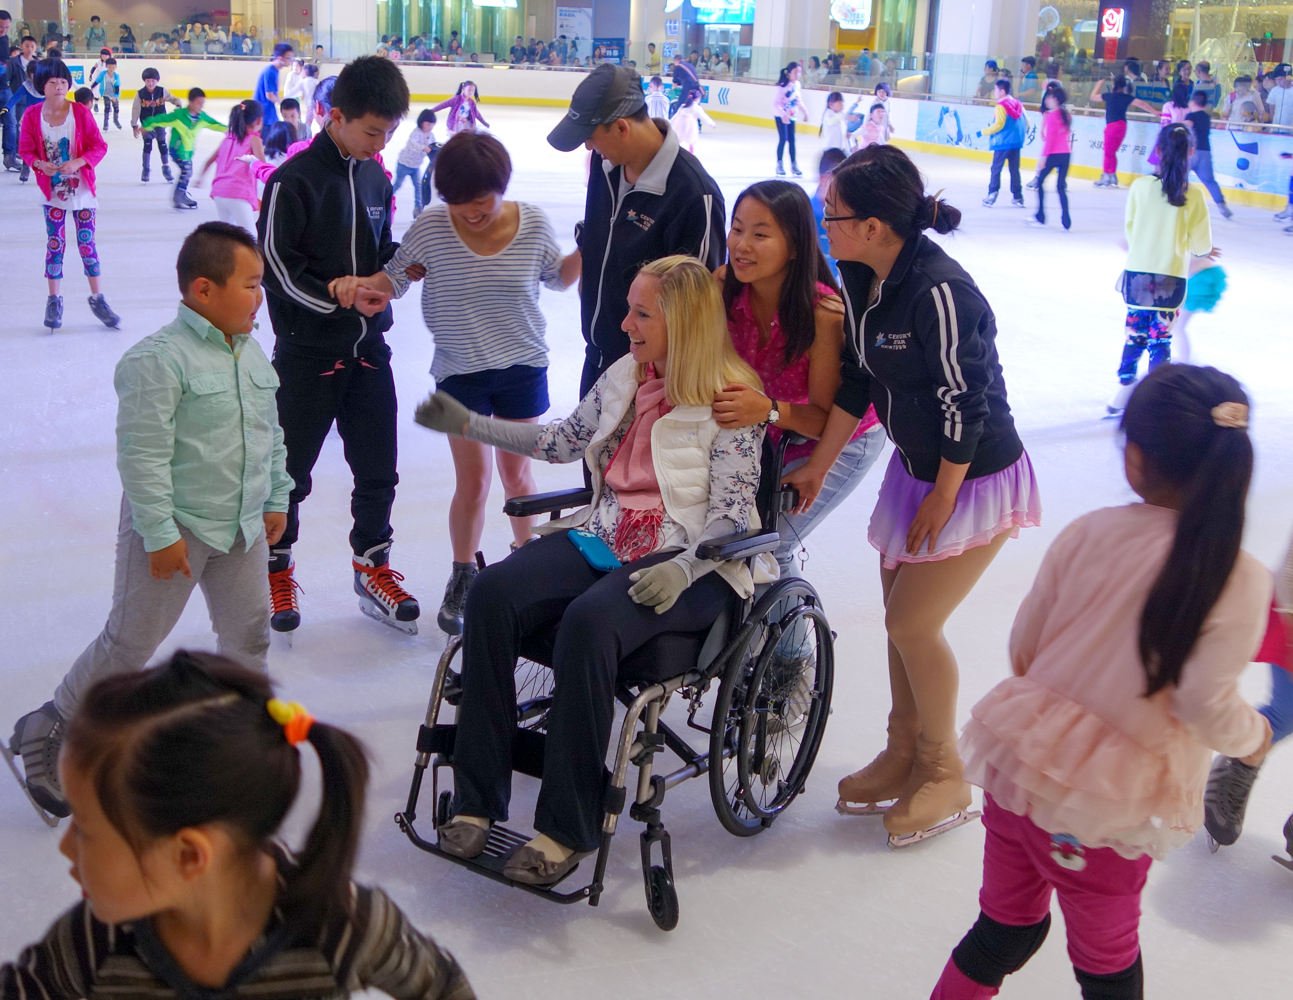 In her blog, Ingersoll talks about how the hospital staff agreed to let her go iceskating if she would be the centerpiece for an ice show. ”It was probably the most amusing thing I had done in Kunming,” she says.